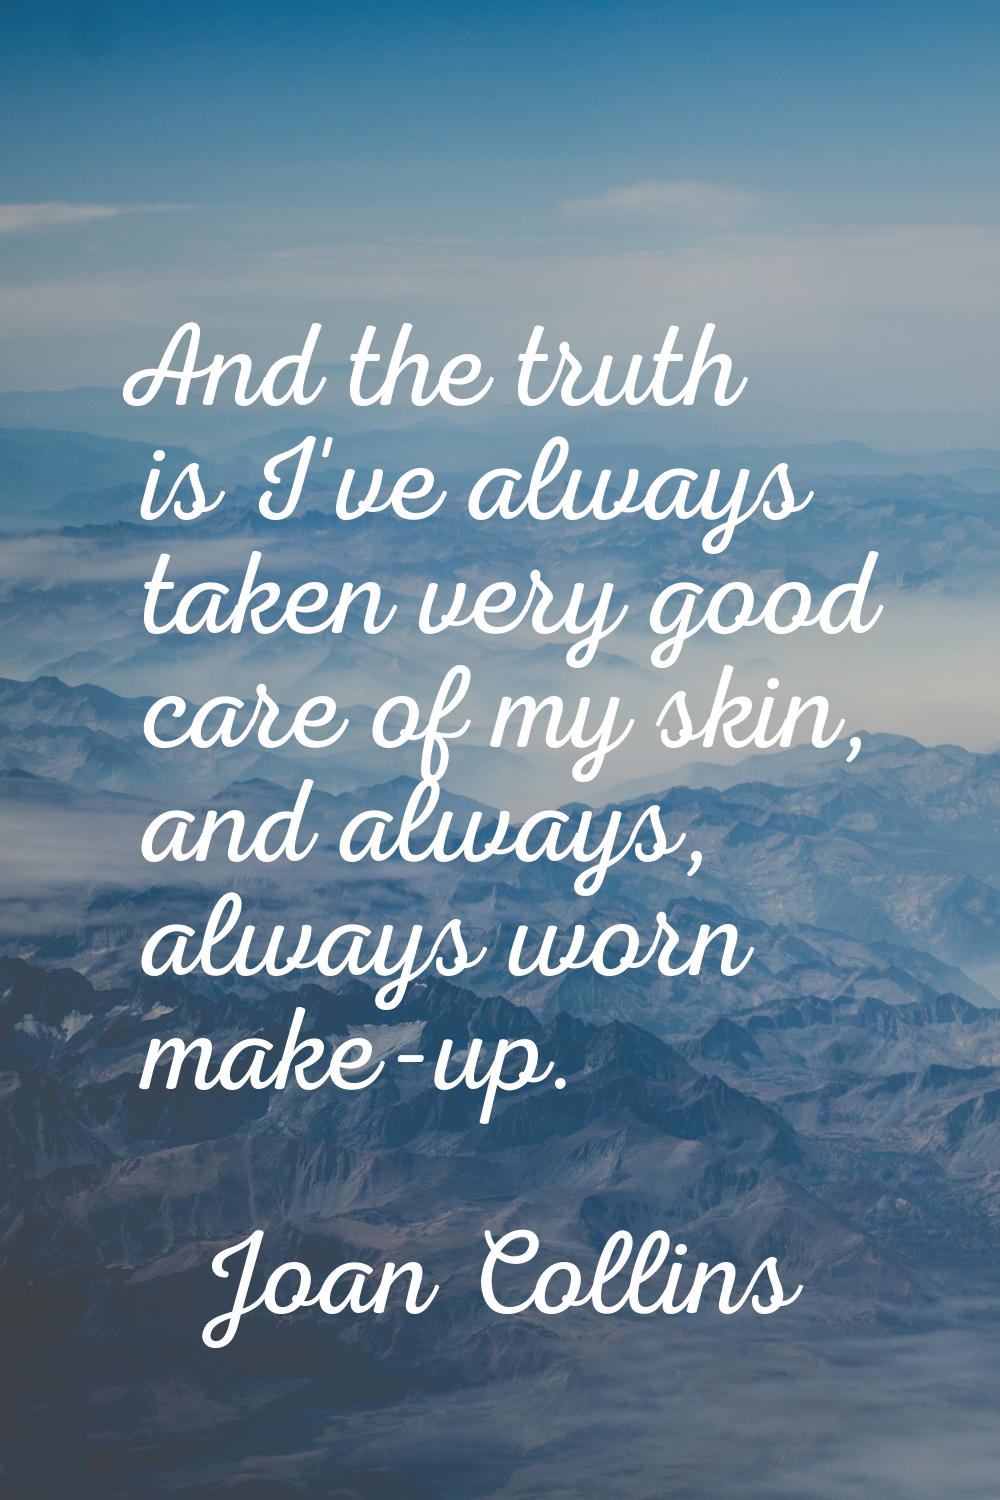 And the truth is I've always taken very good care of my skin, and always, always worn make-up.